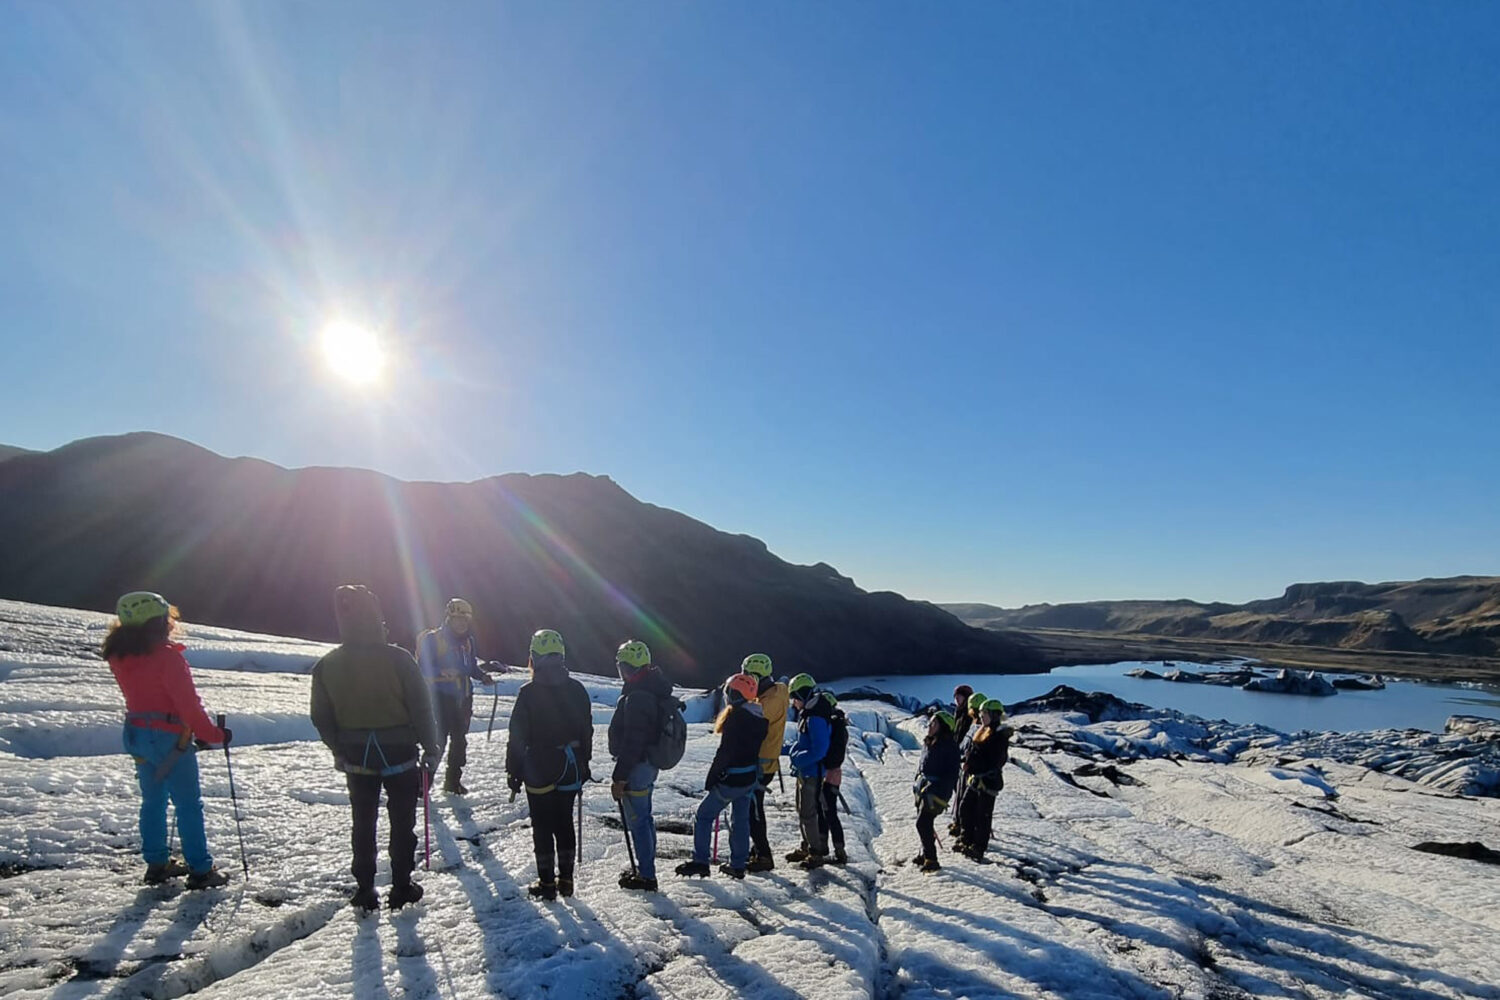 People standing on the glacier on a sunny day.